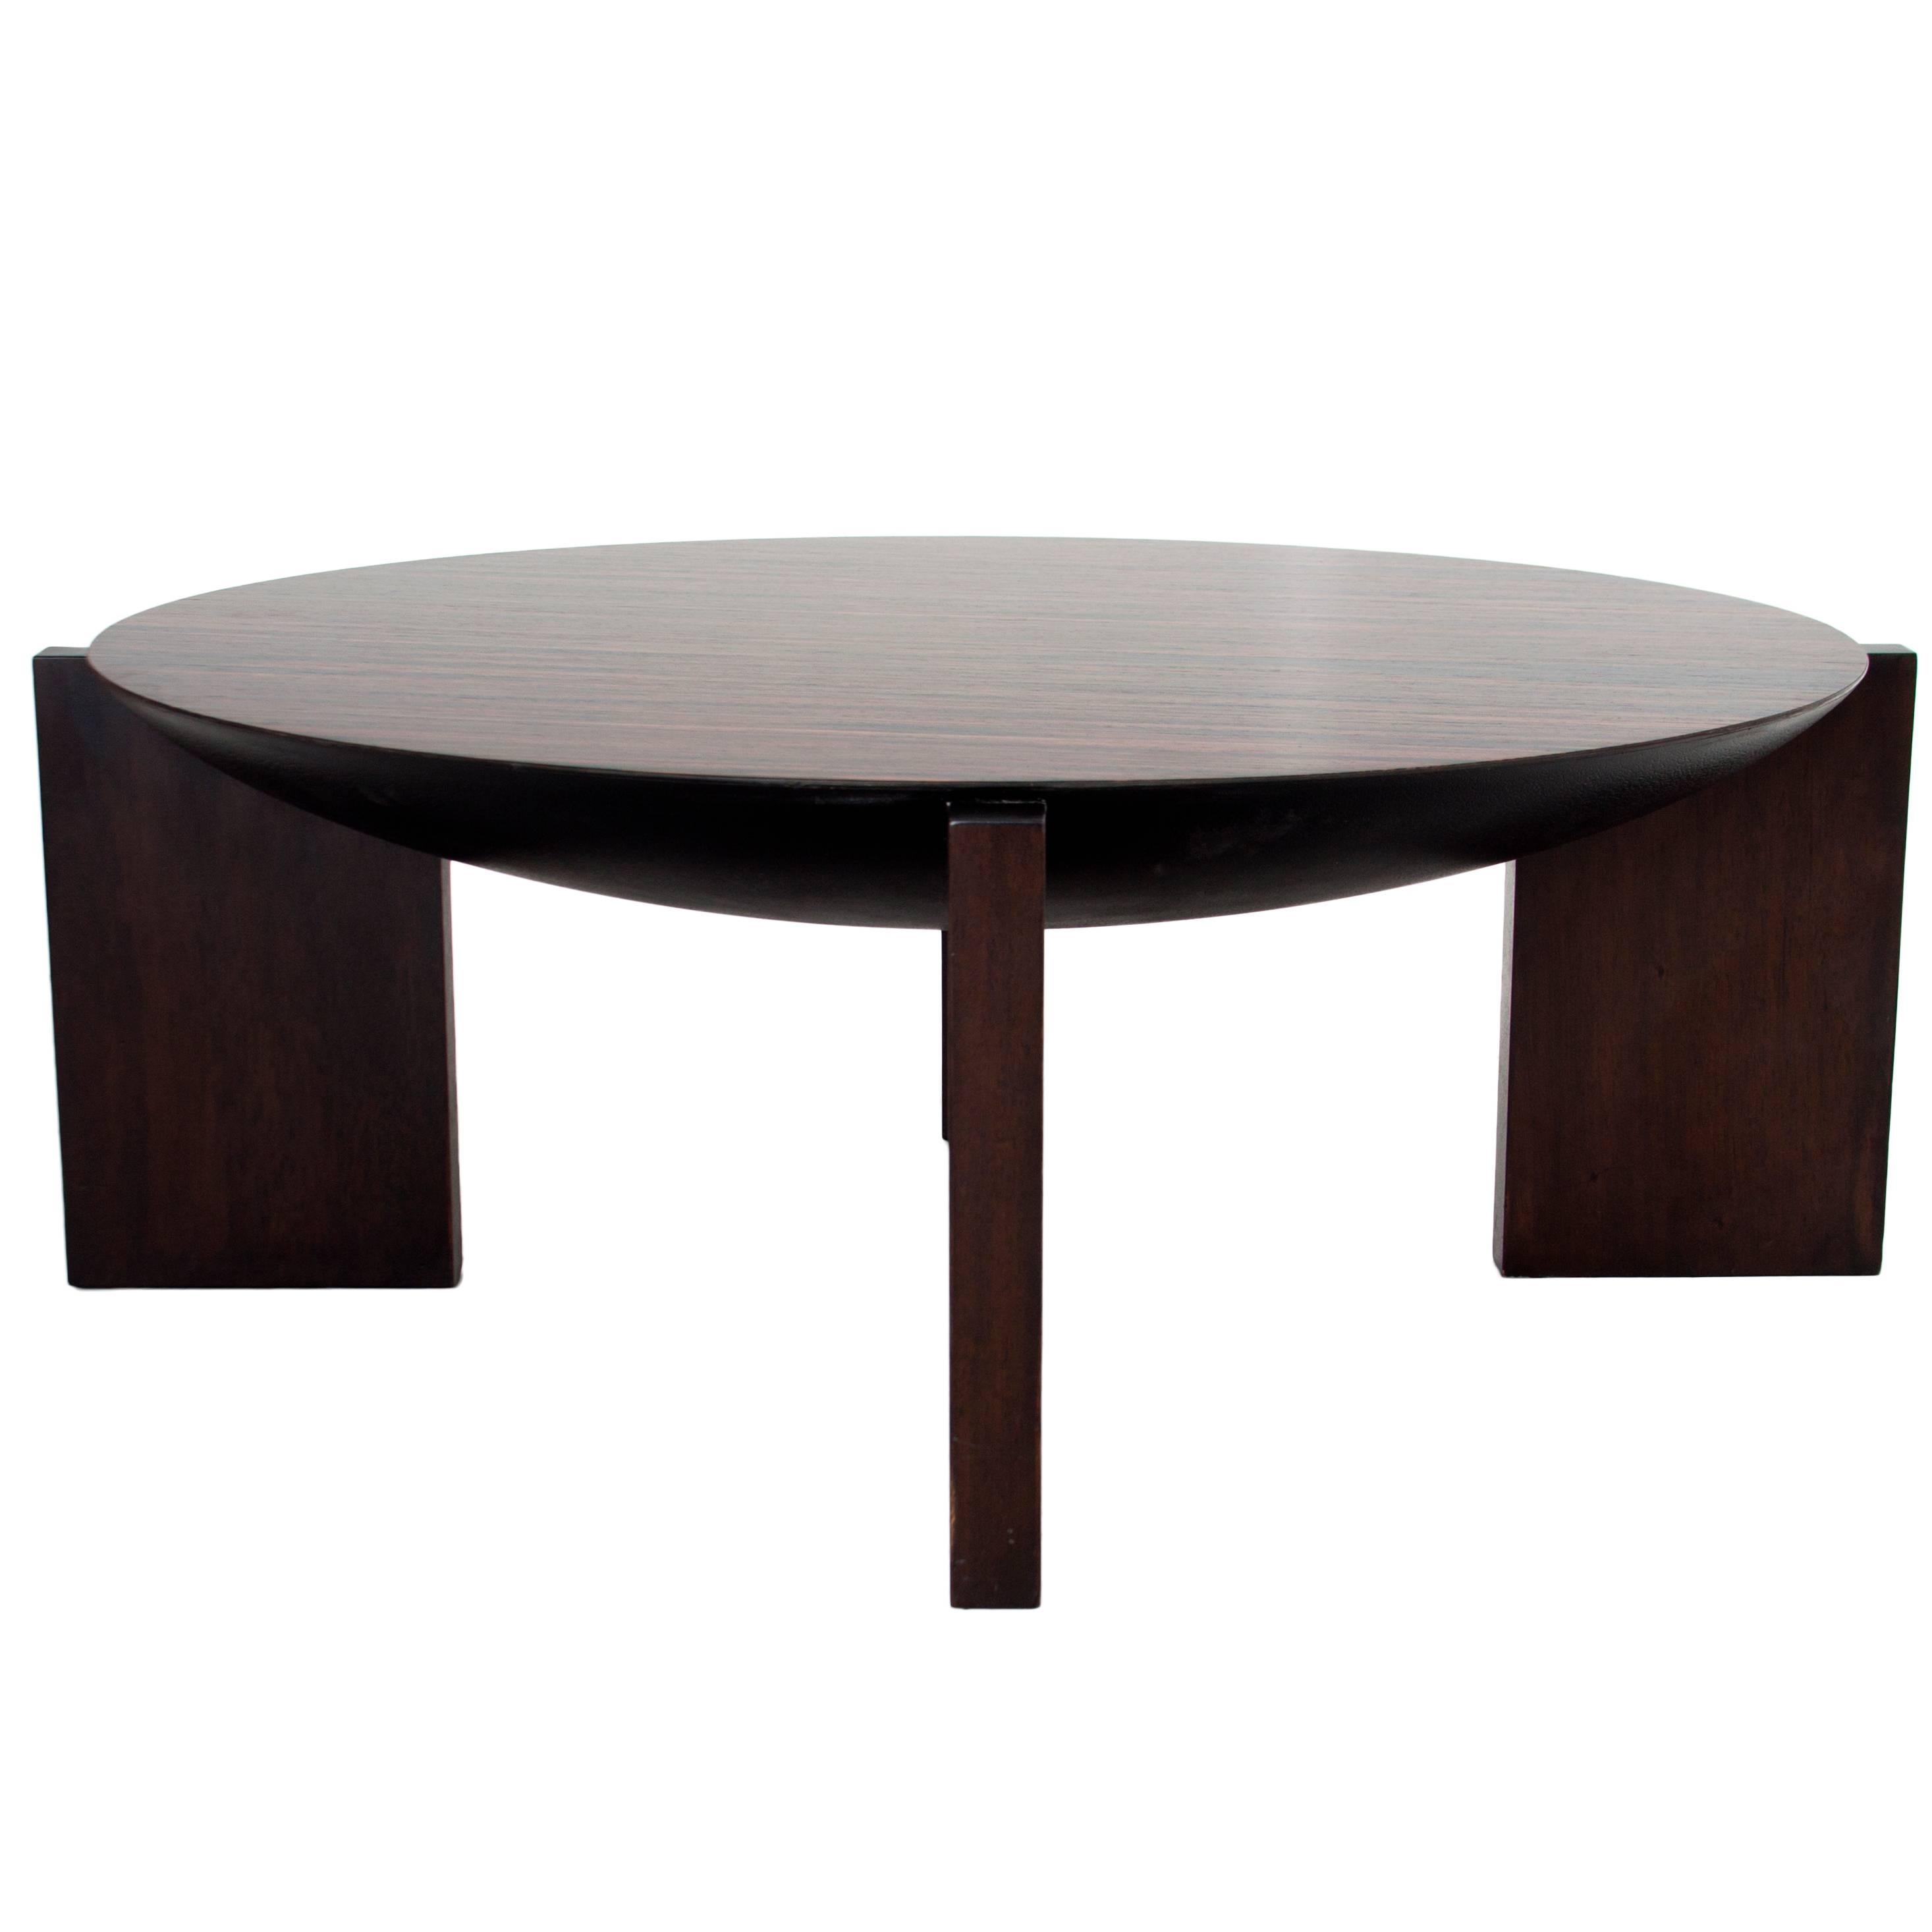 Wendell Castle Olympia Table with Macassar Ebony Top For Sale